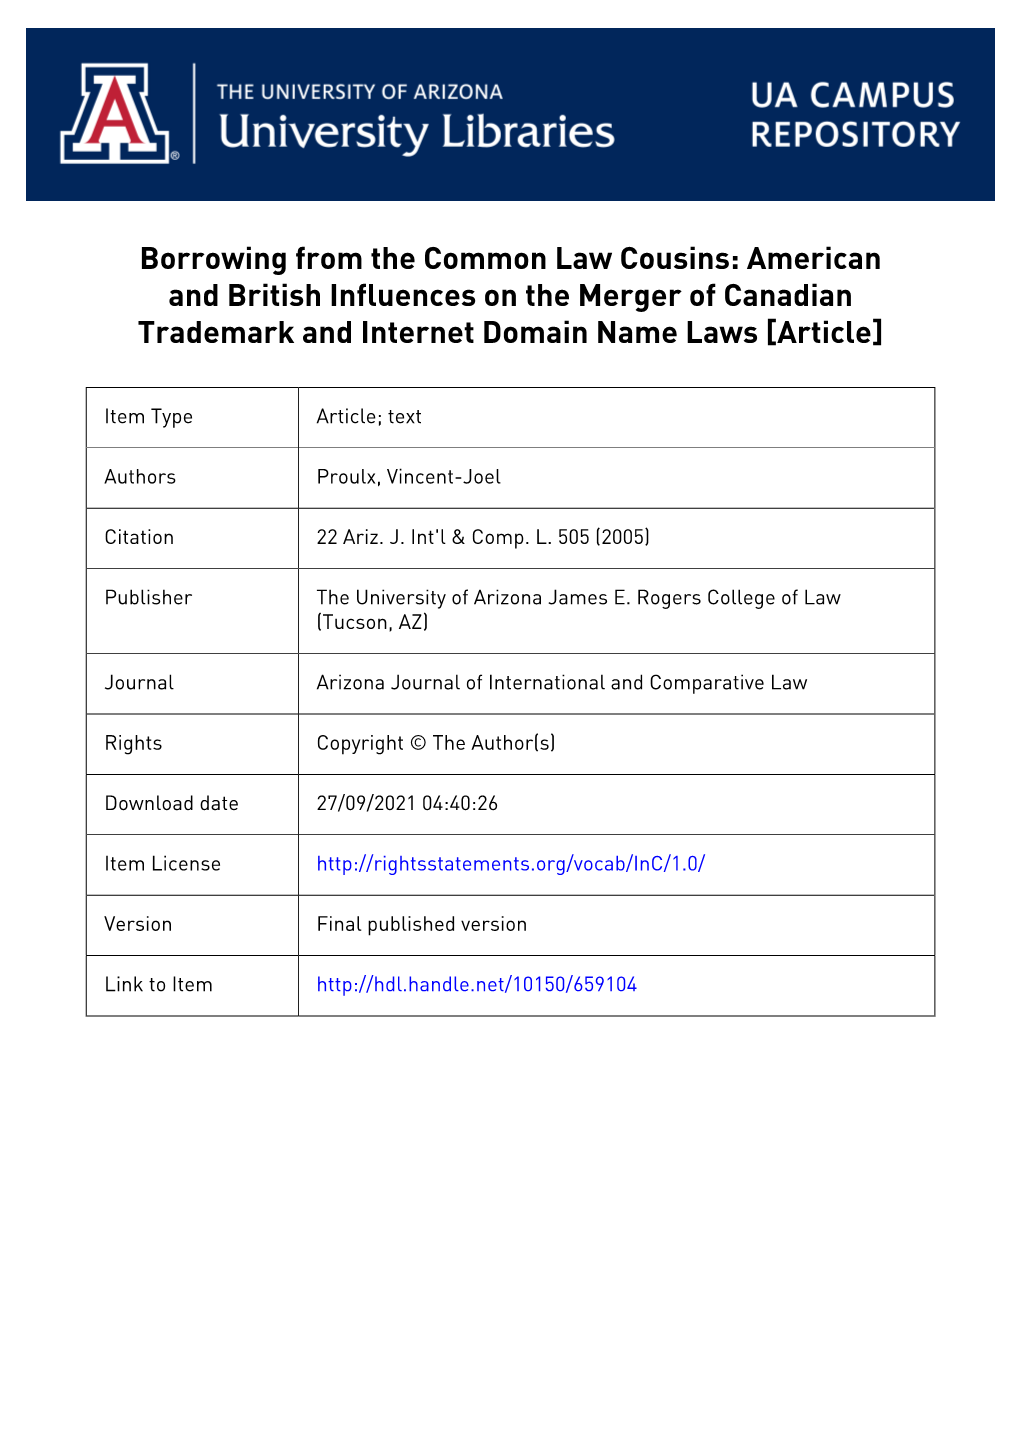 Borrowing from the Common Law Cousins: American and British Influences on the Merger of Canadian Trademark and Internet Domain Name Laws [Article]